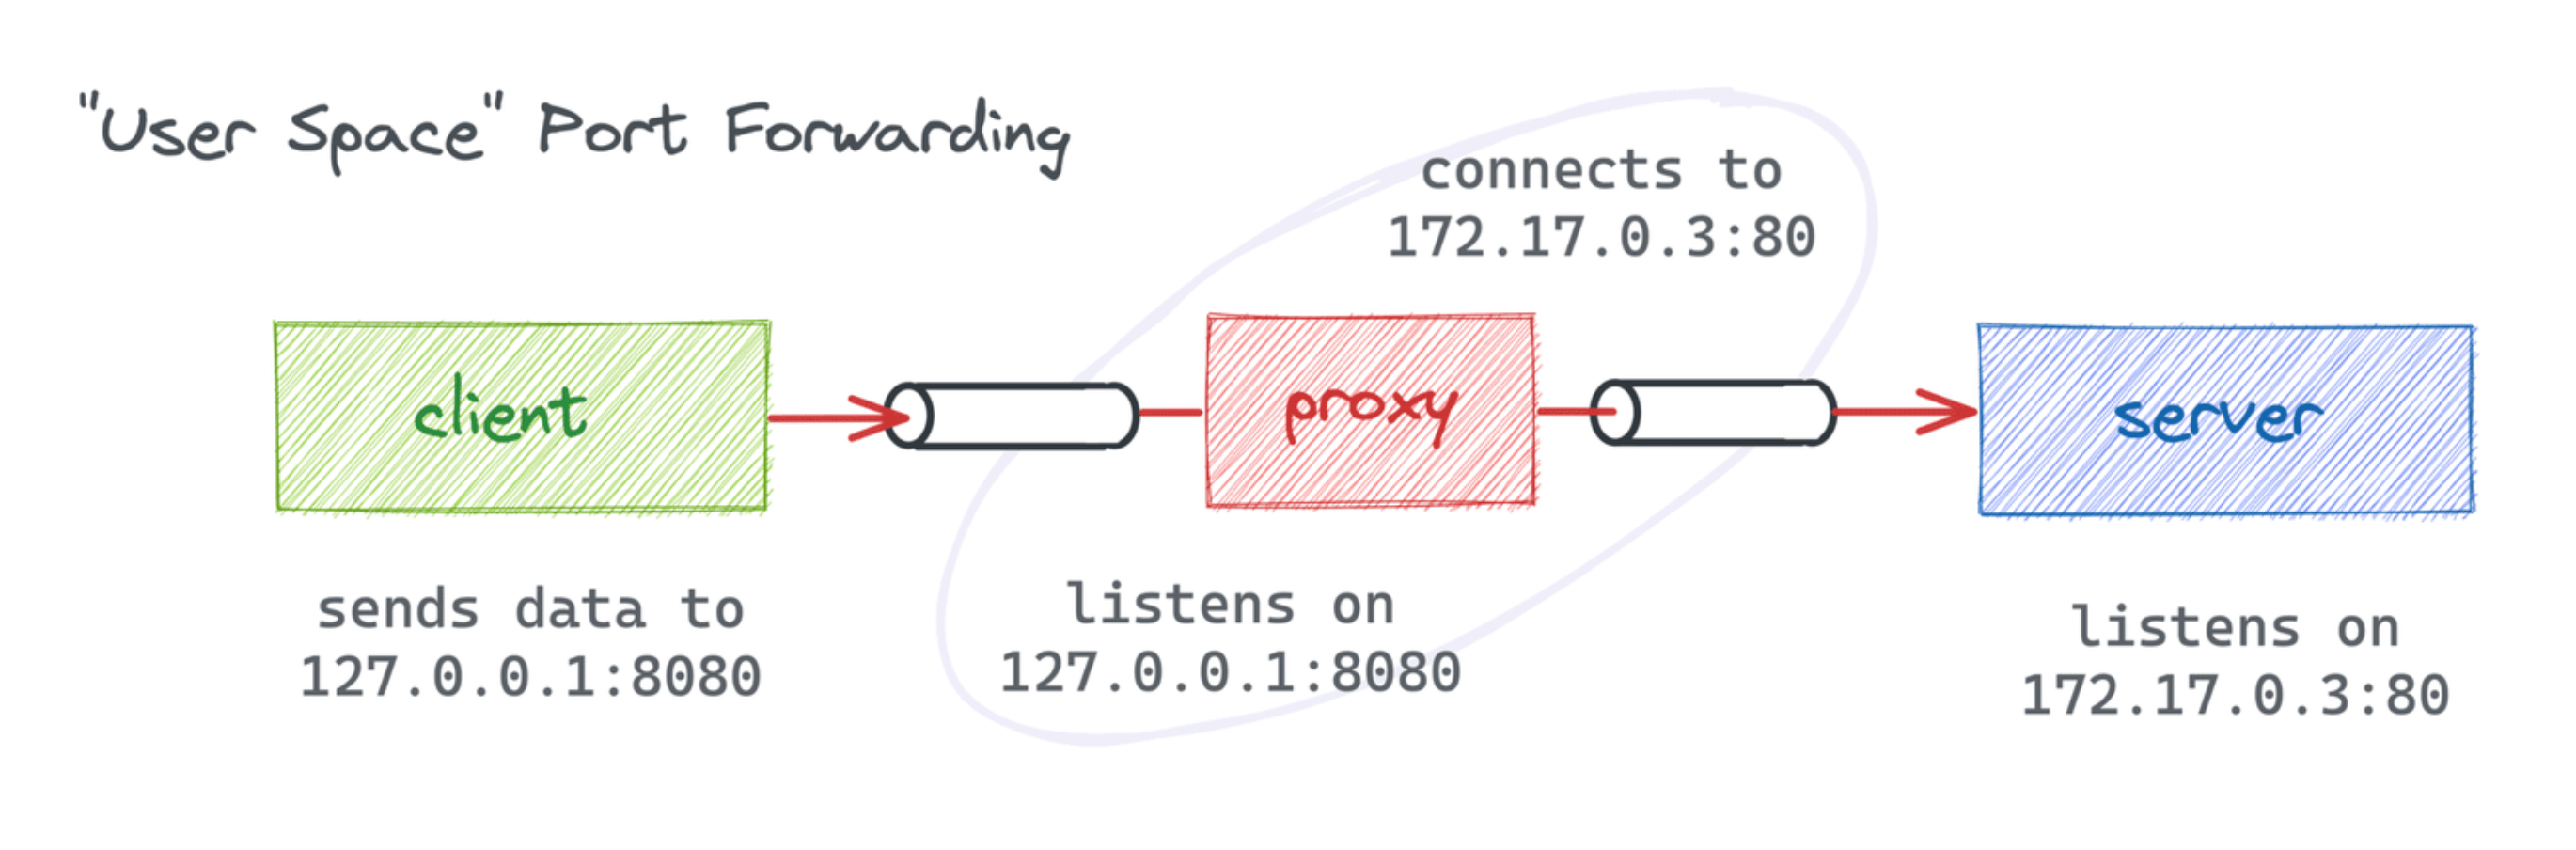 Port forwarding with a user-space proxy (socat, netcat, etc.)